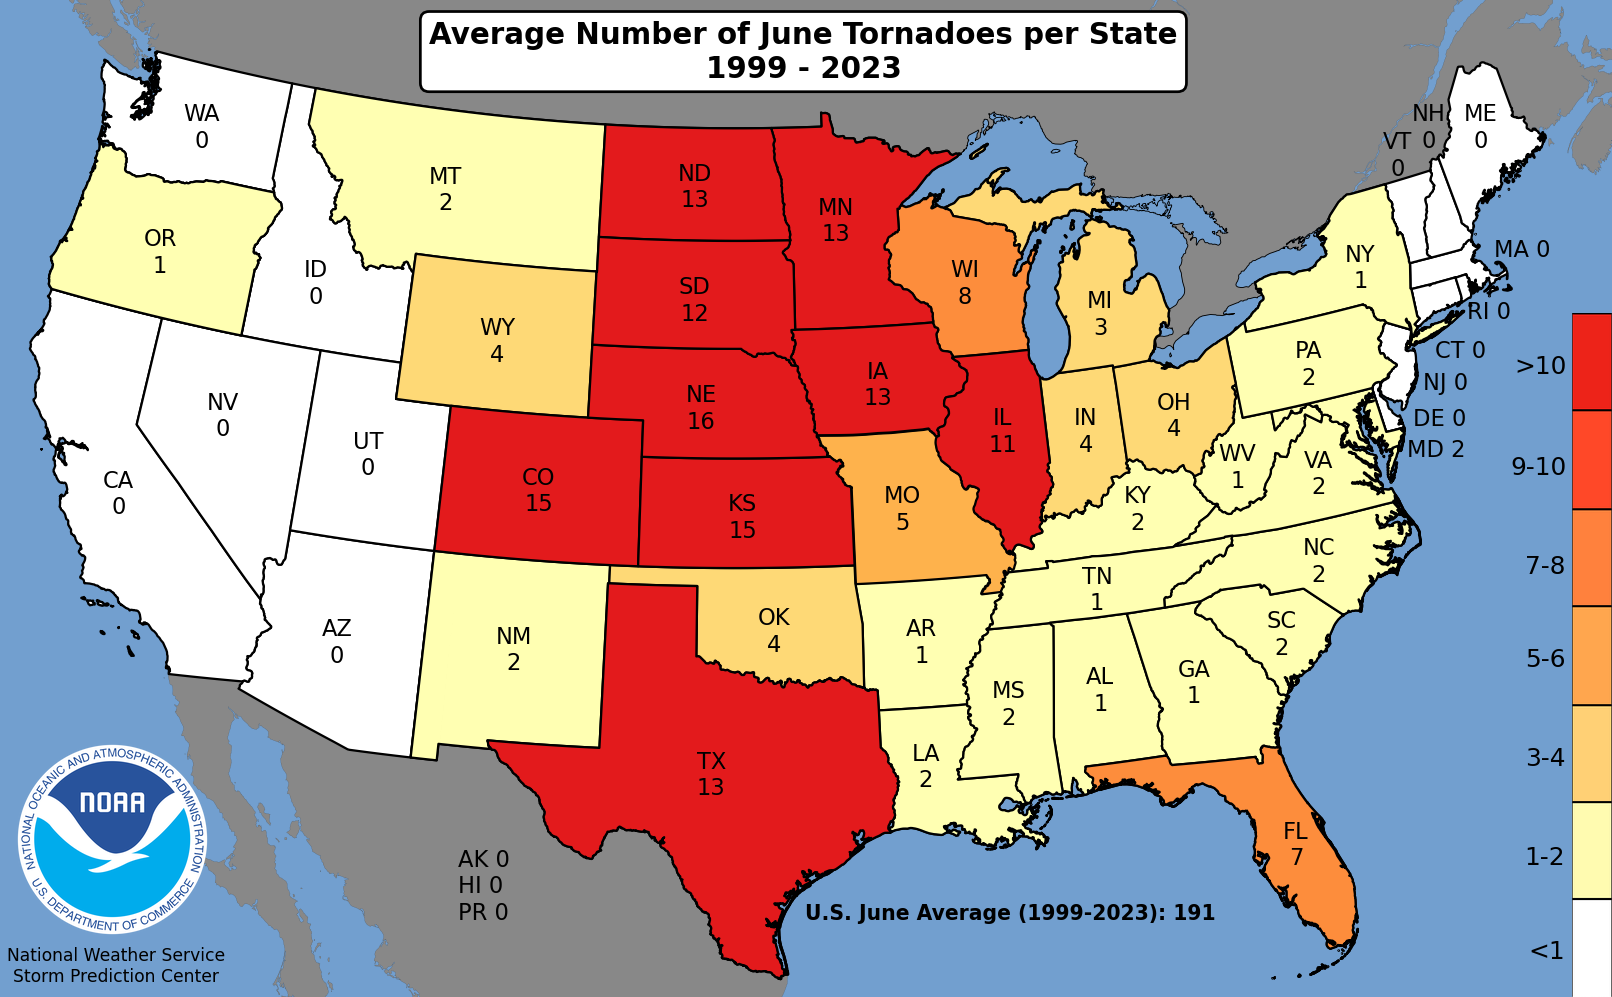 Here’s where tornadoes typically form in June across the United States